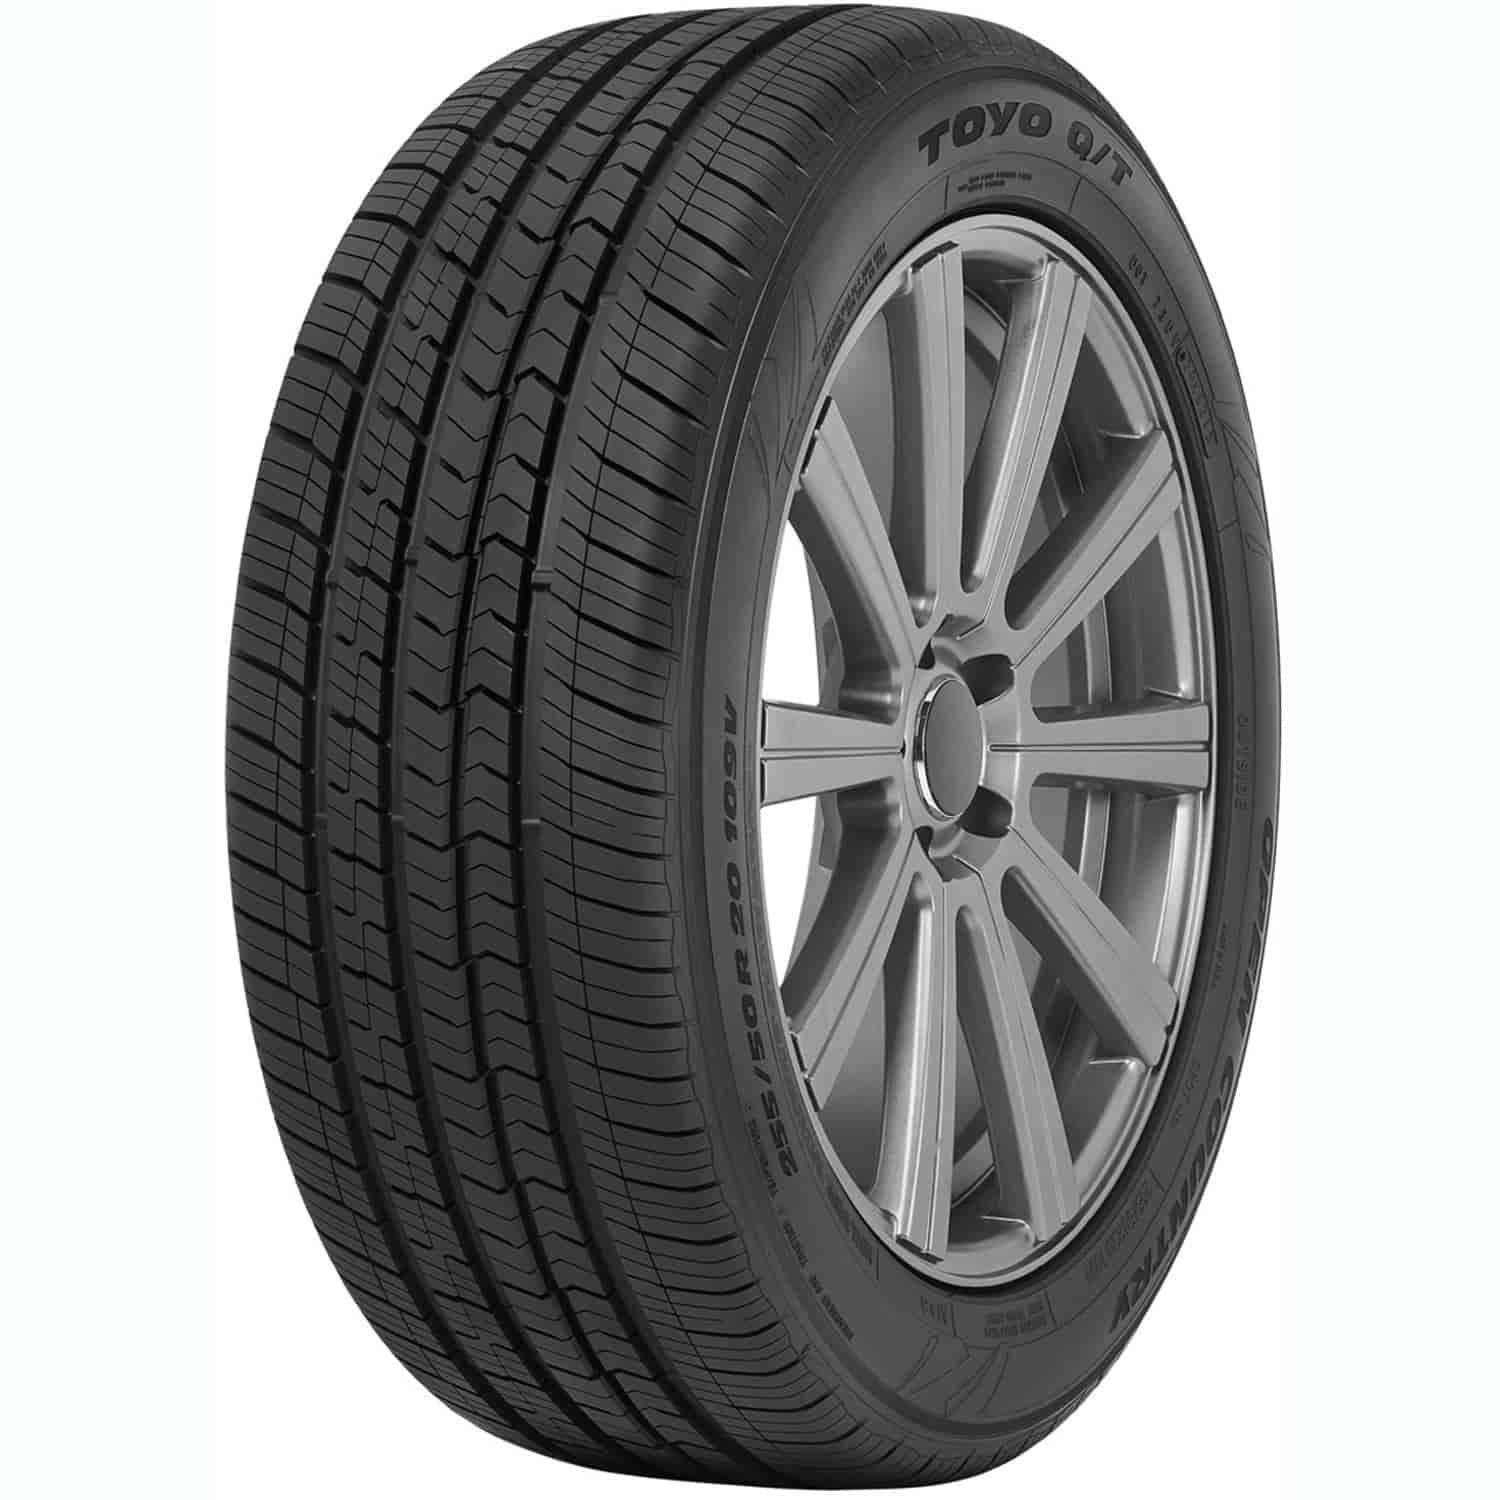 OPEN COUNTRY Q/T 235/60R18 107V XL